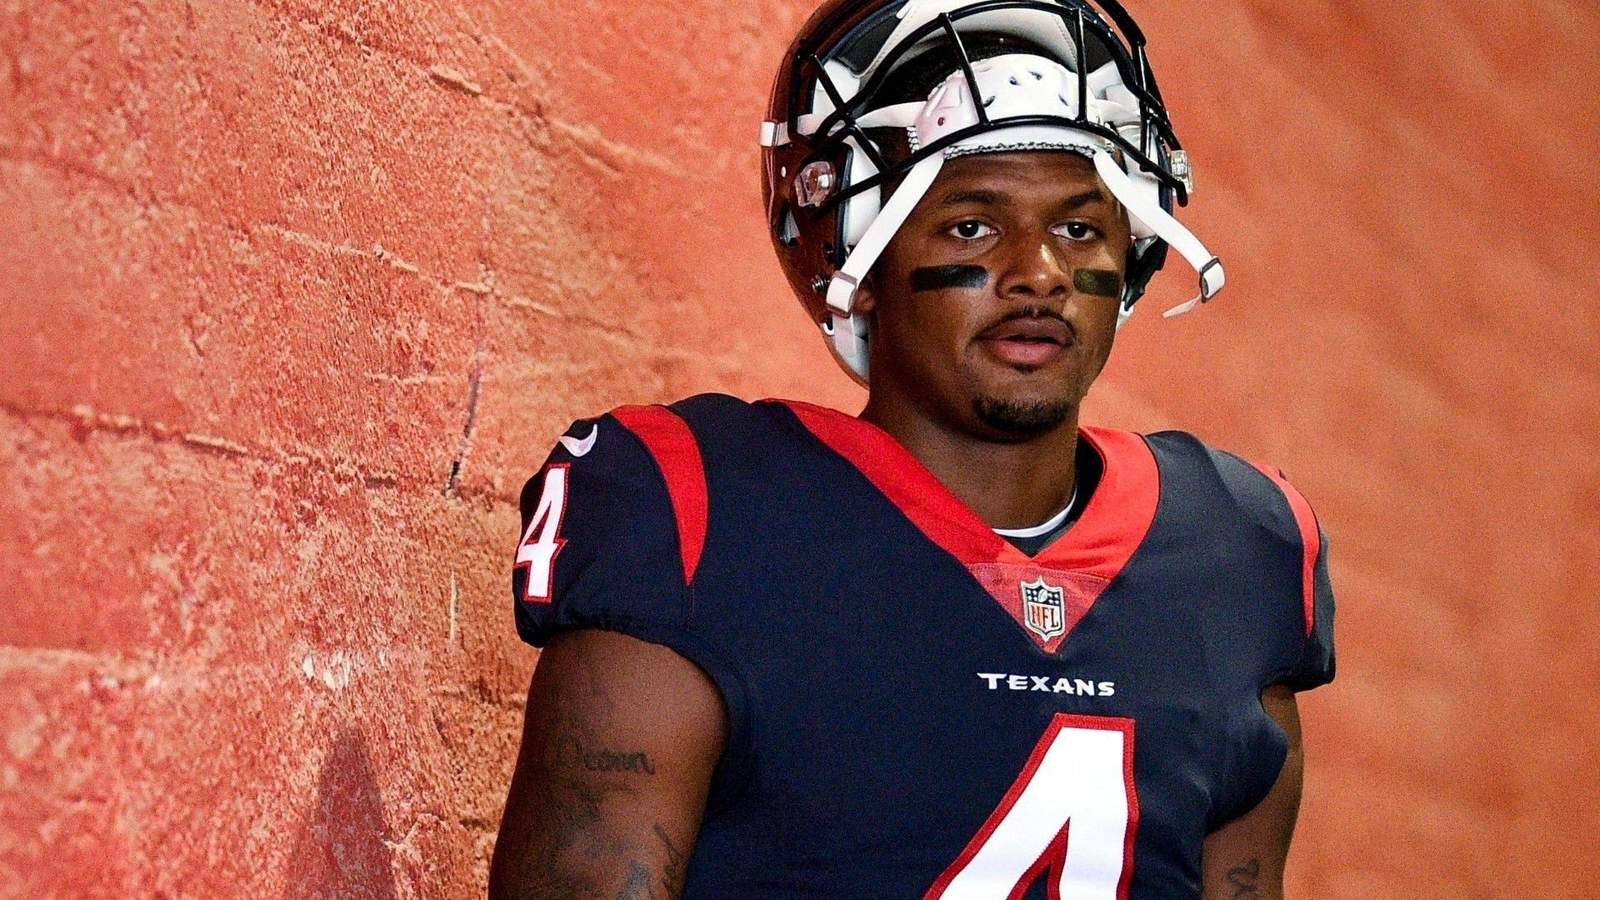 22 lawsuits against Texans quarterback Deshaun Watson will be consolidated, presented to 1 judge